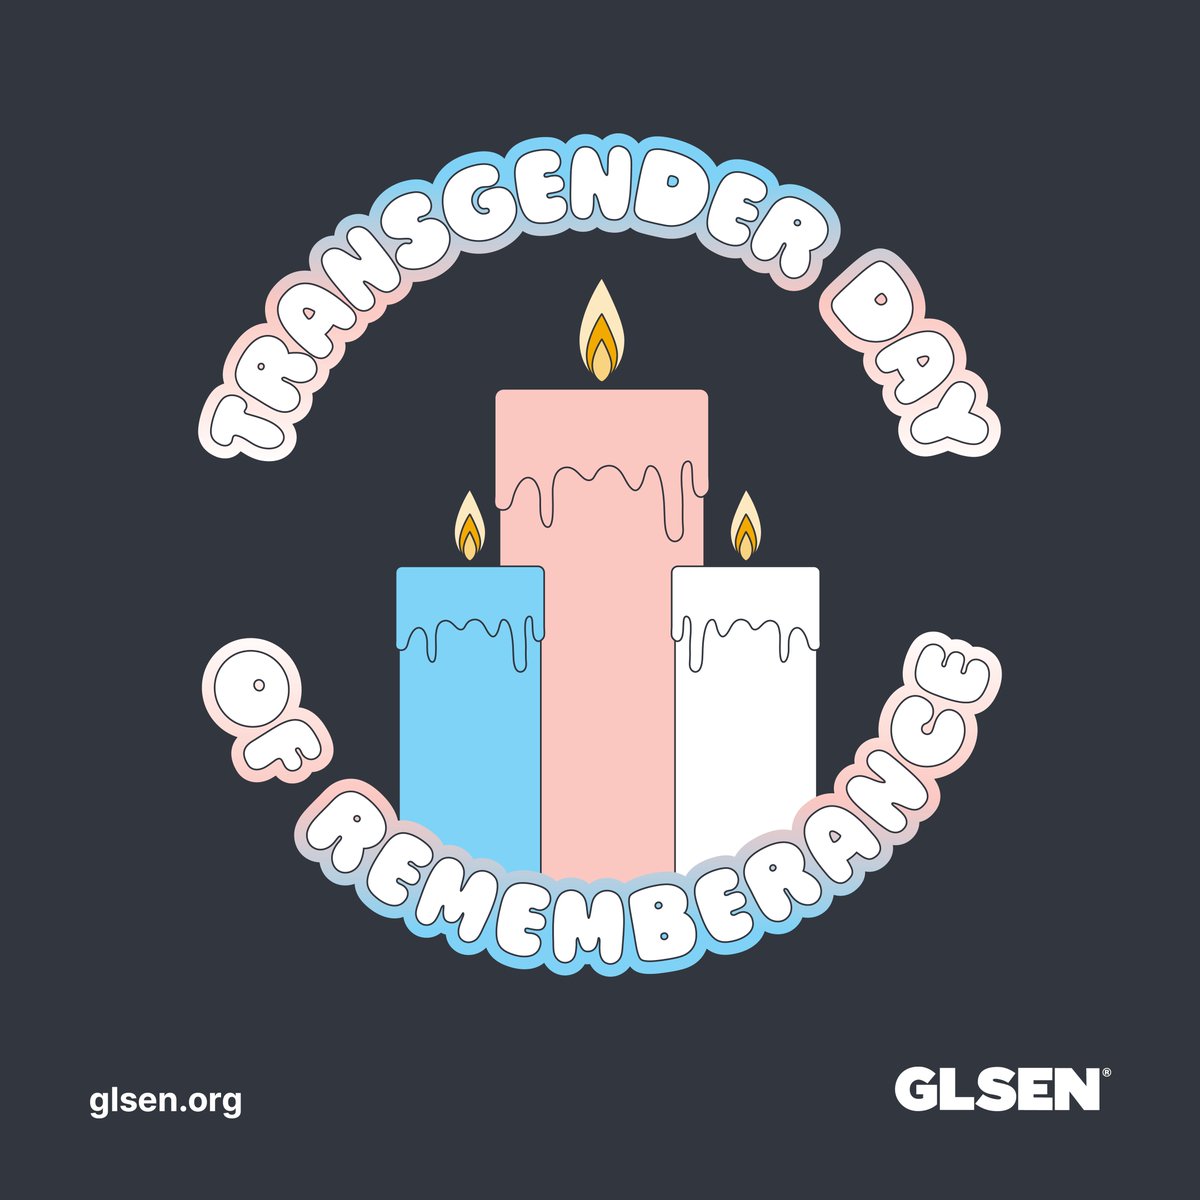 Transgender people—particularly Black trans women—are facing an epidemic of violence and oppression. Today we honor the memory of trans lives lost, and we continue the fight for trans liberation. #TransgenderDayofRemembrance